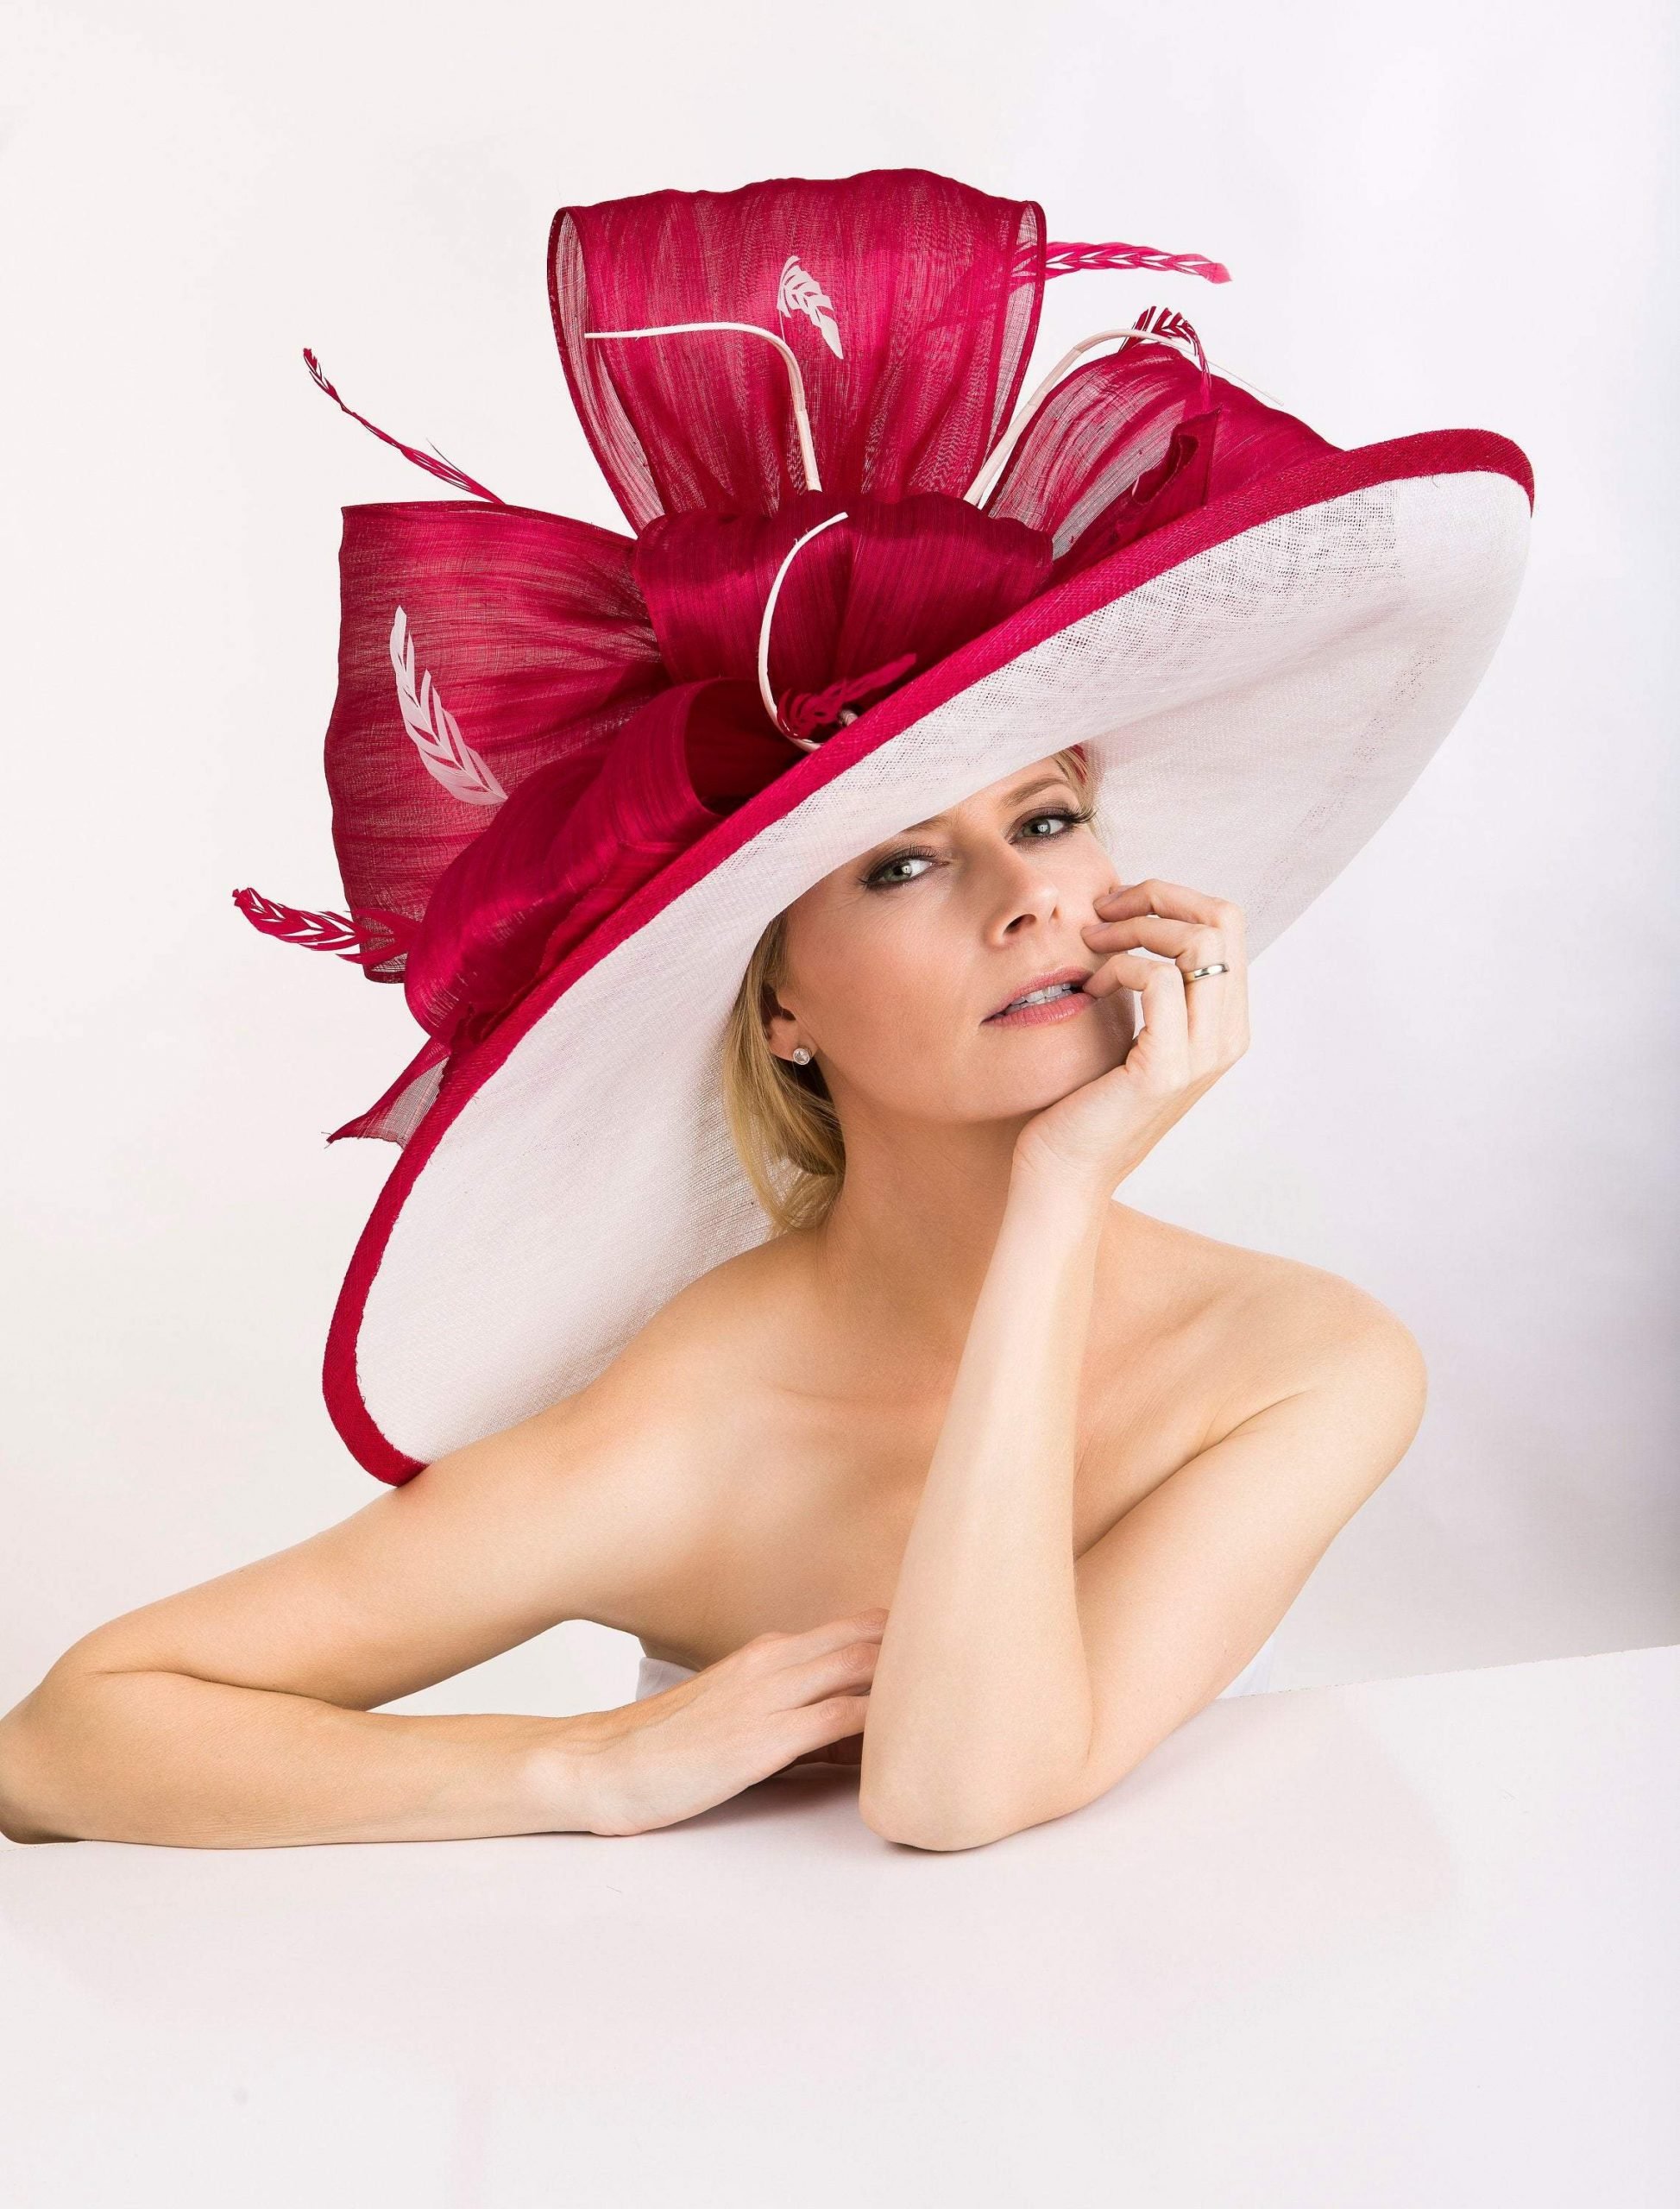 Limited adition! Large hat. Kentucky derby hat. Derby hat. Designer hat. Red hat. White hat.  Red hat. Races. Royal ascot hat. Wedding hat.